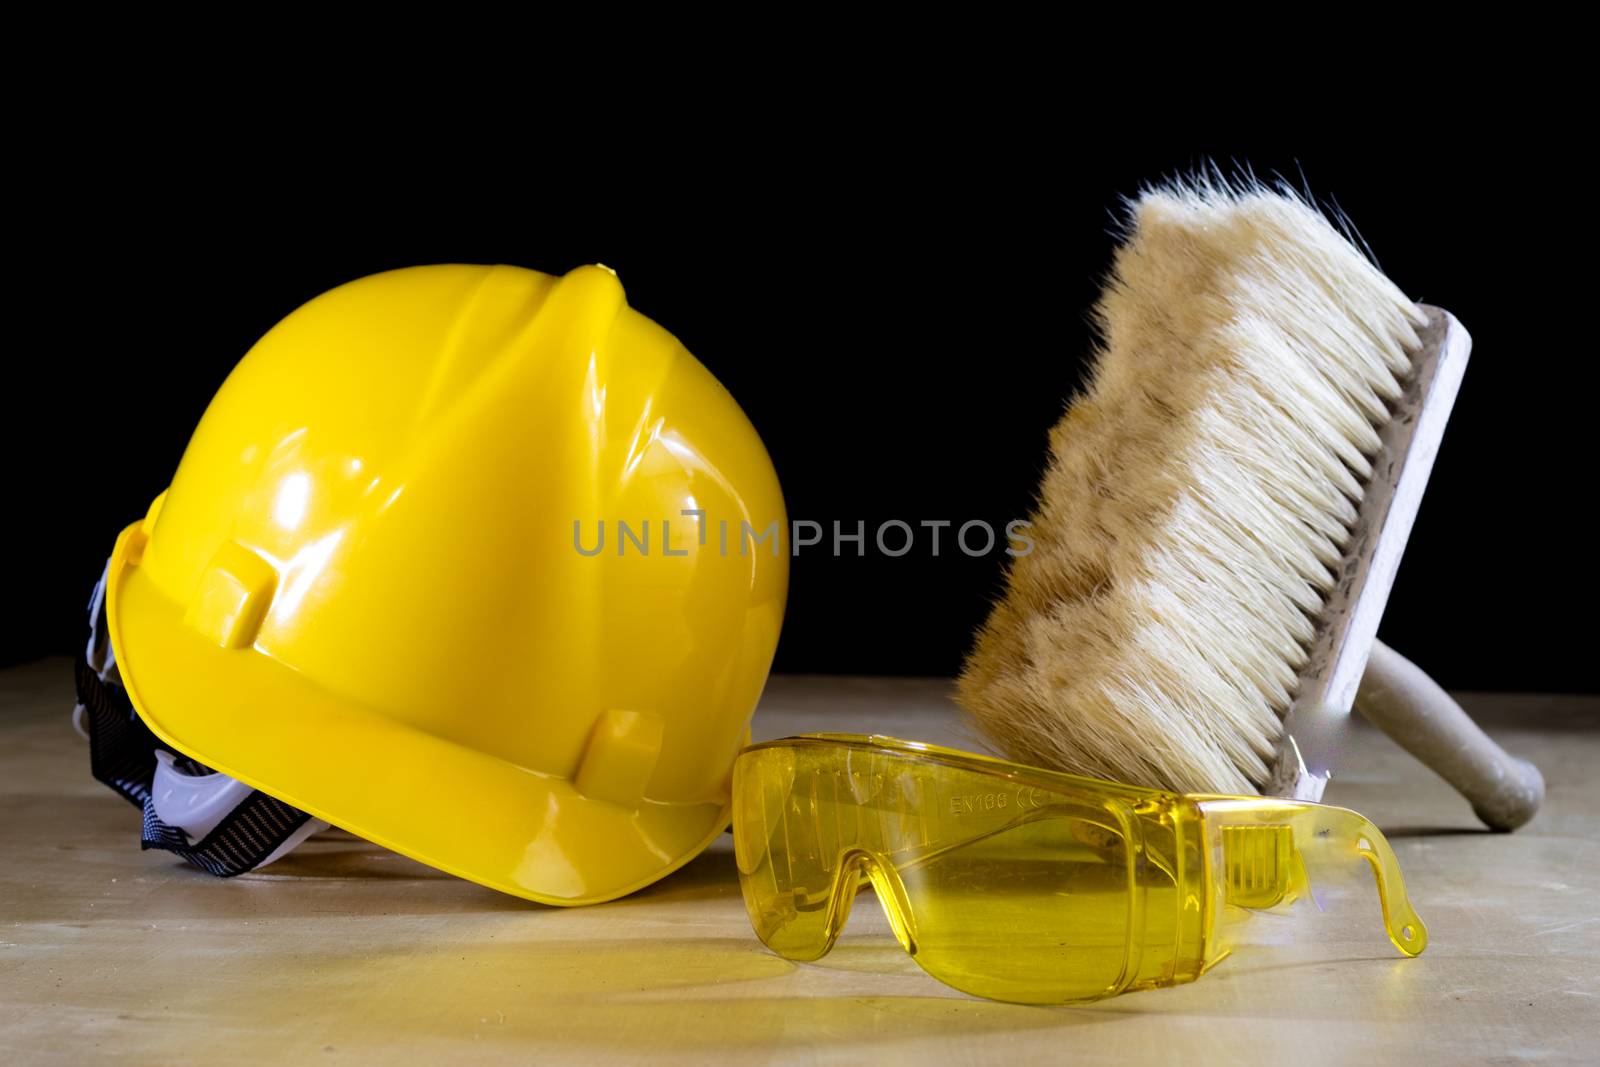 Safety glasses, helmet, work gloves and brush. Tools on a wooden table. Black background.